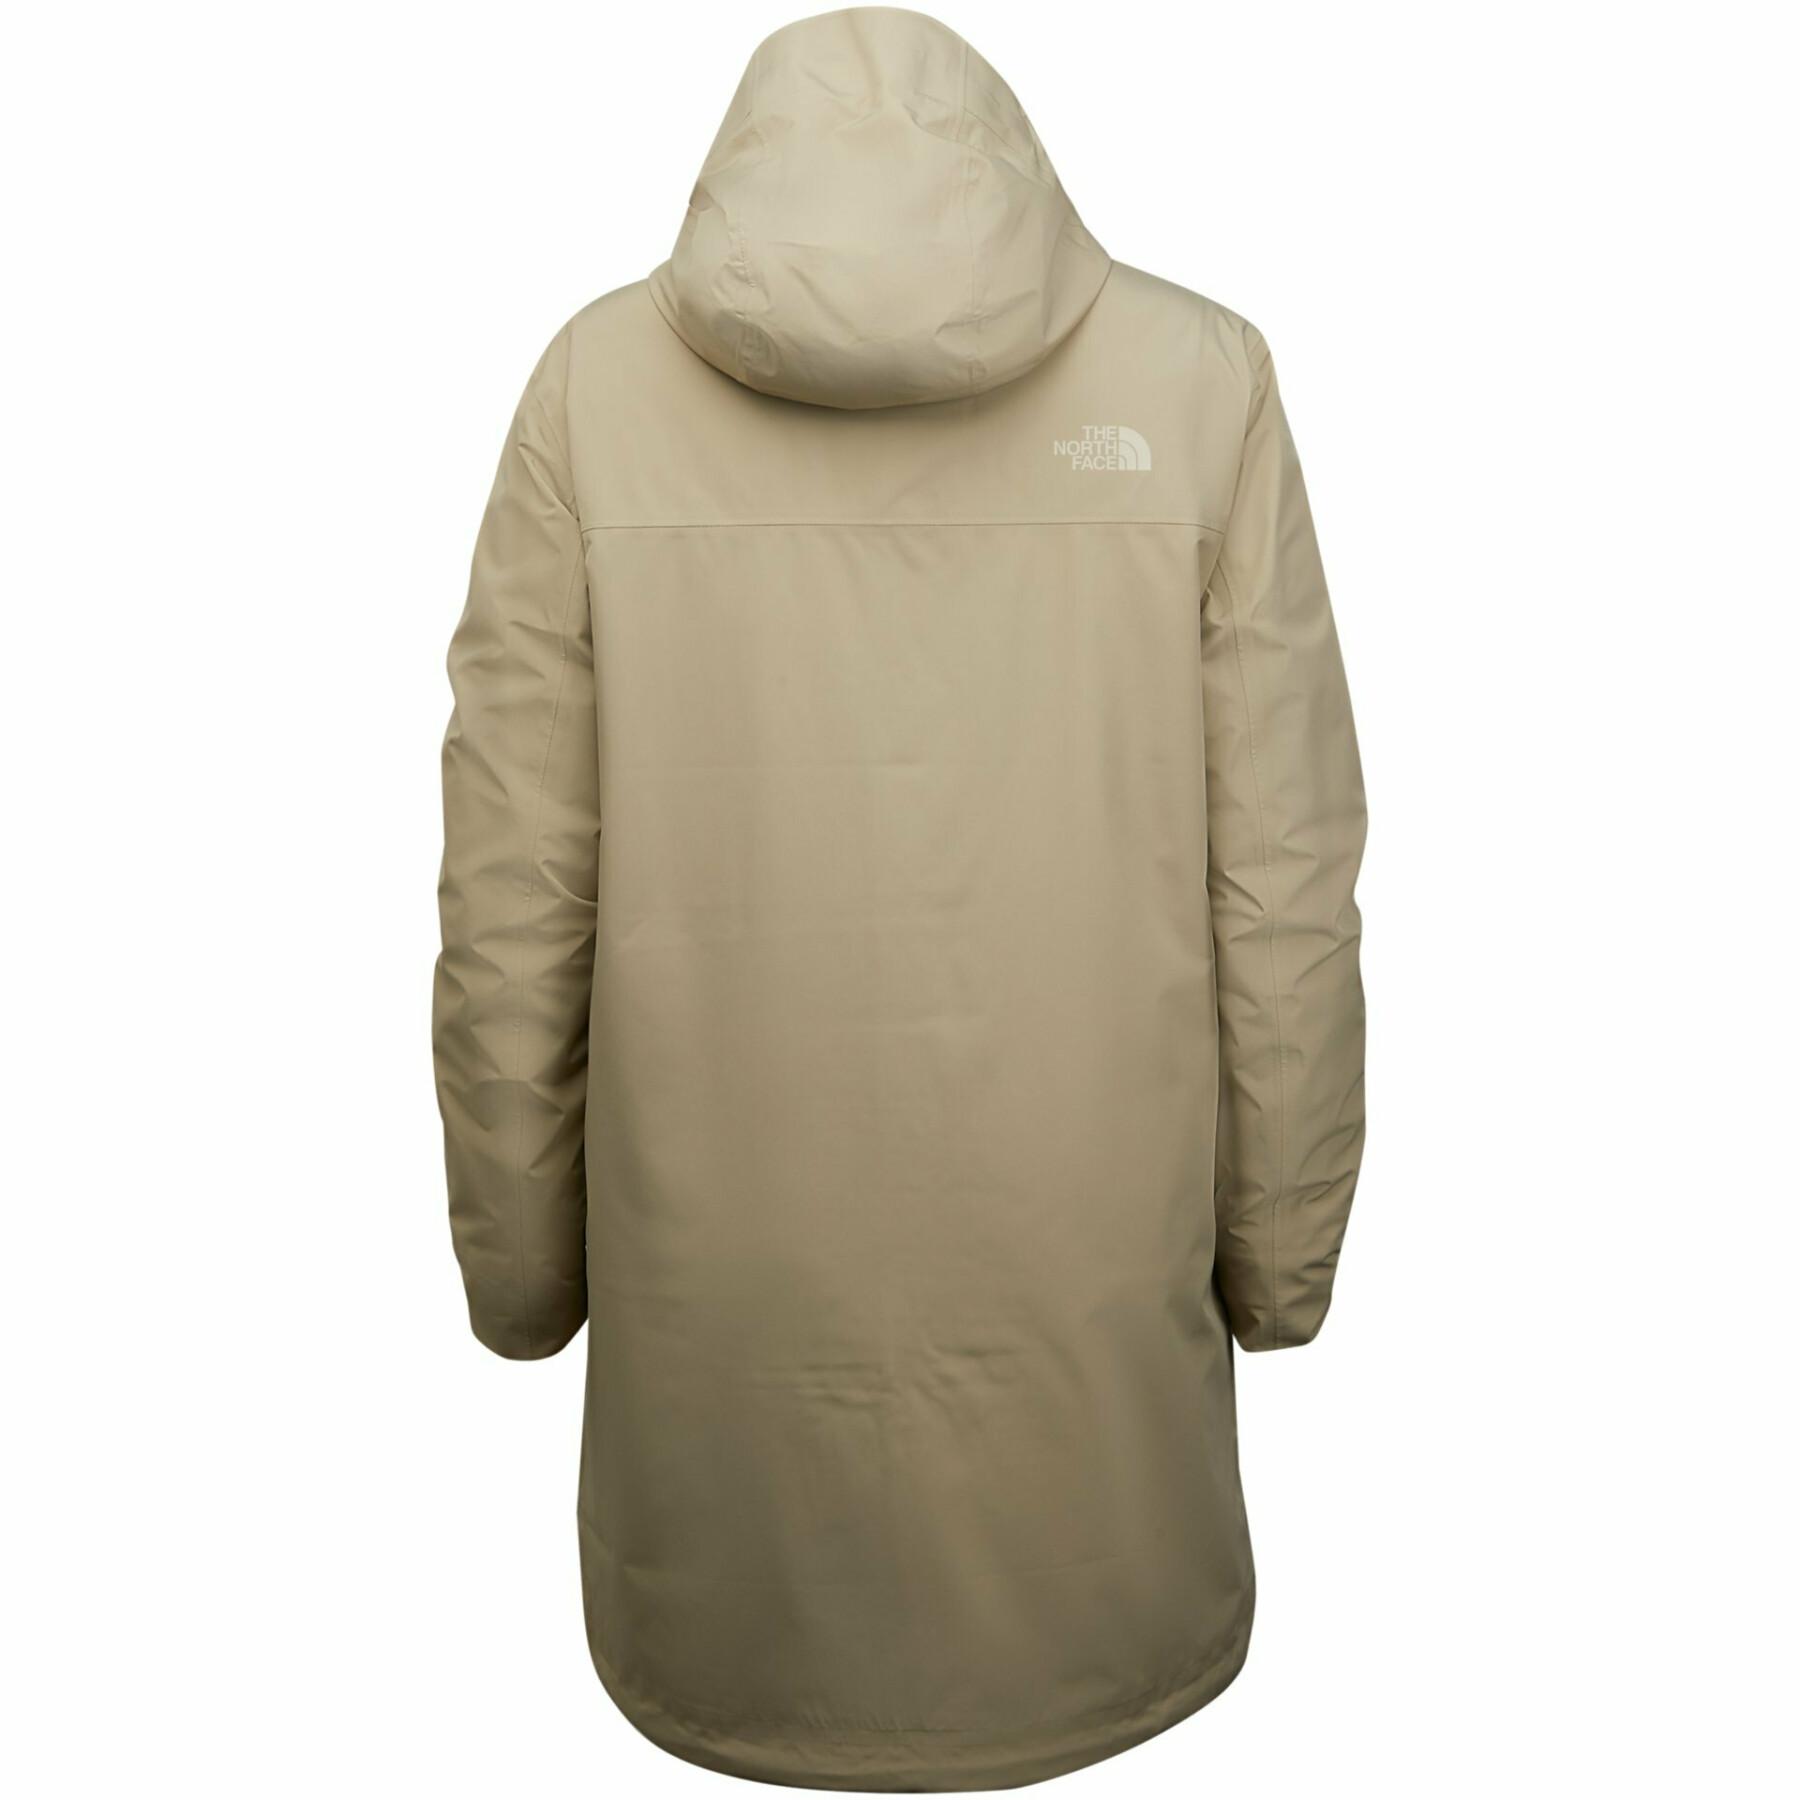 Chaqueta de mujer The North Face Arctic Triclimate